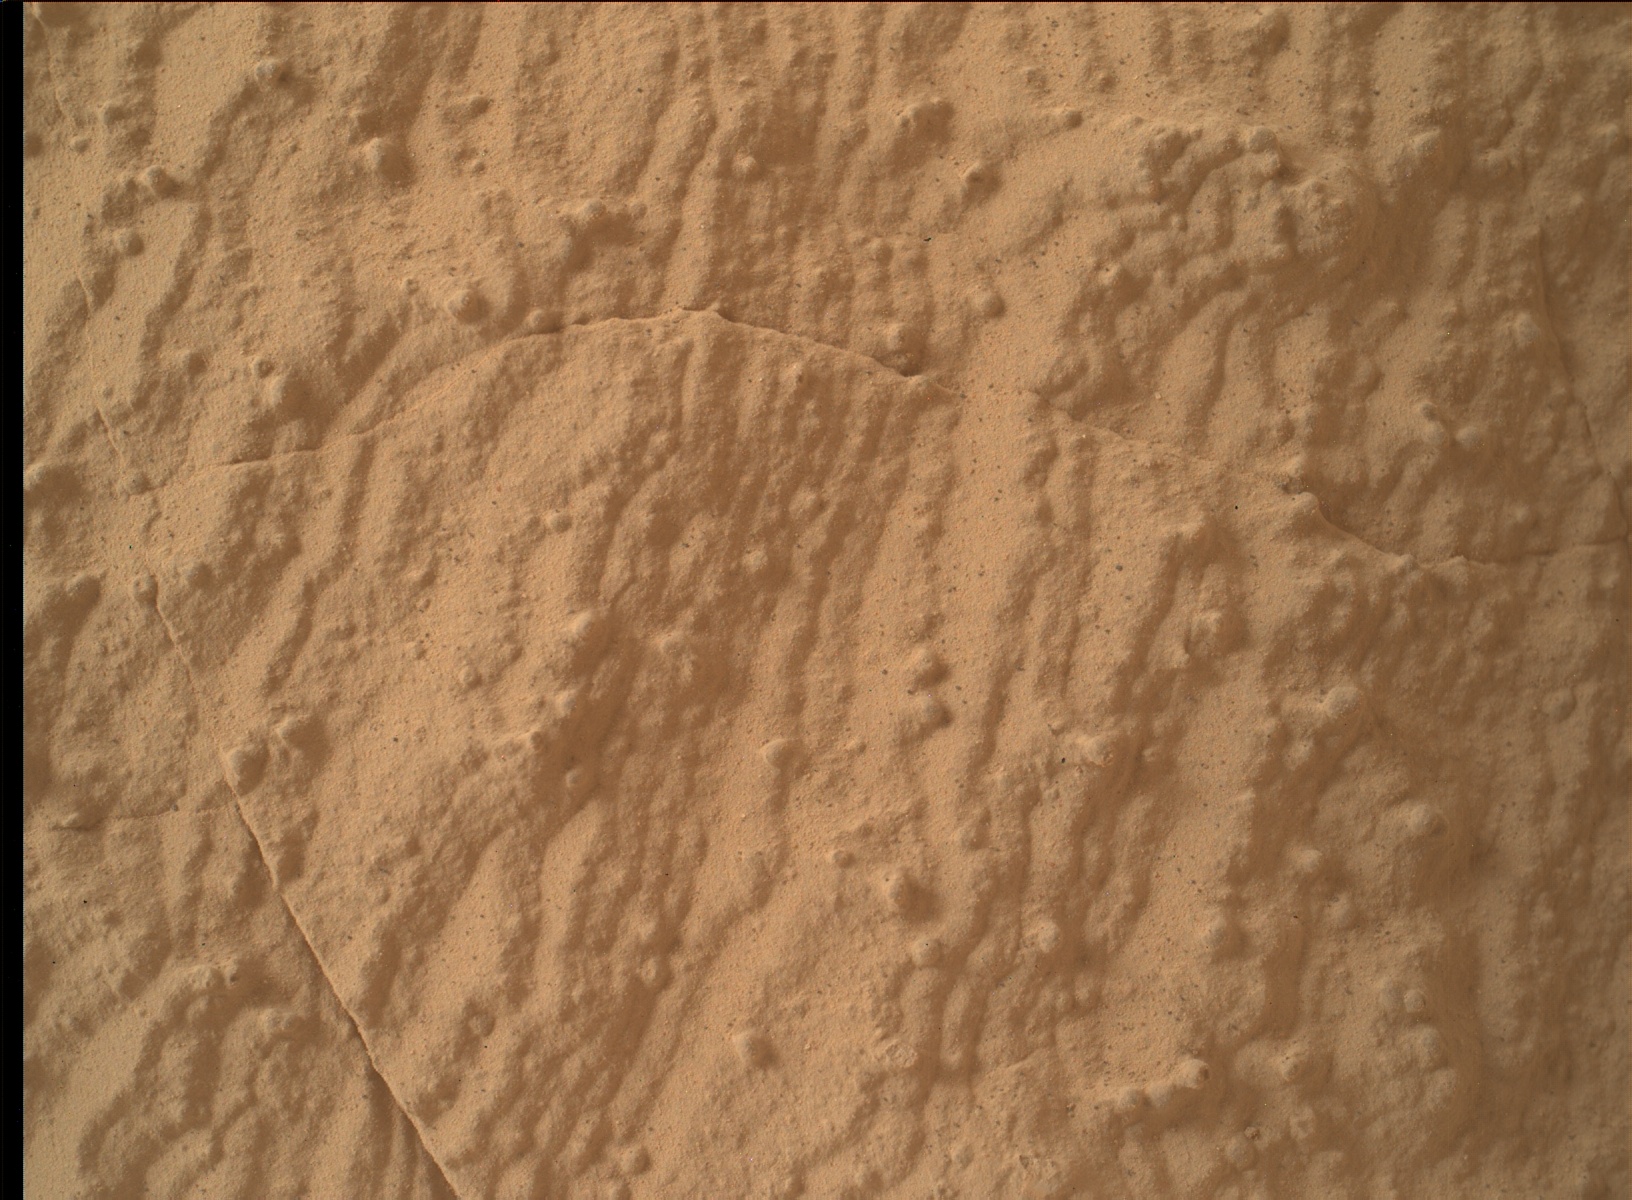 Nasa's Mars rover Curiosity acquired this image using its Mars Hand Lens Imager (MAHLI) on Sol 3934